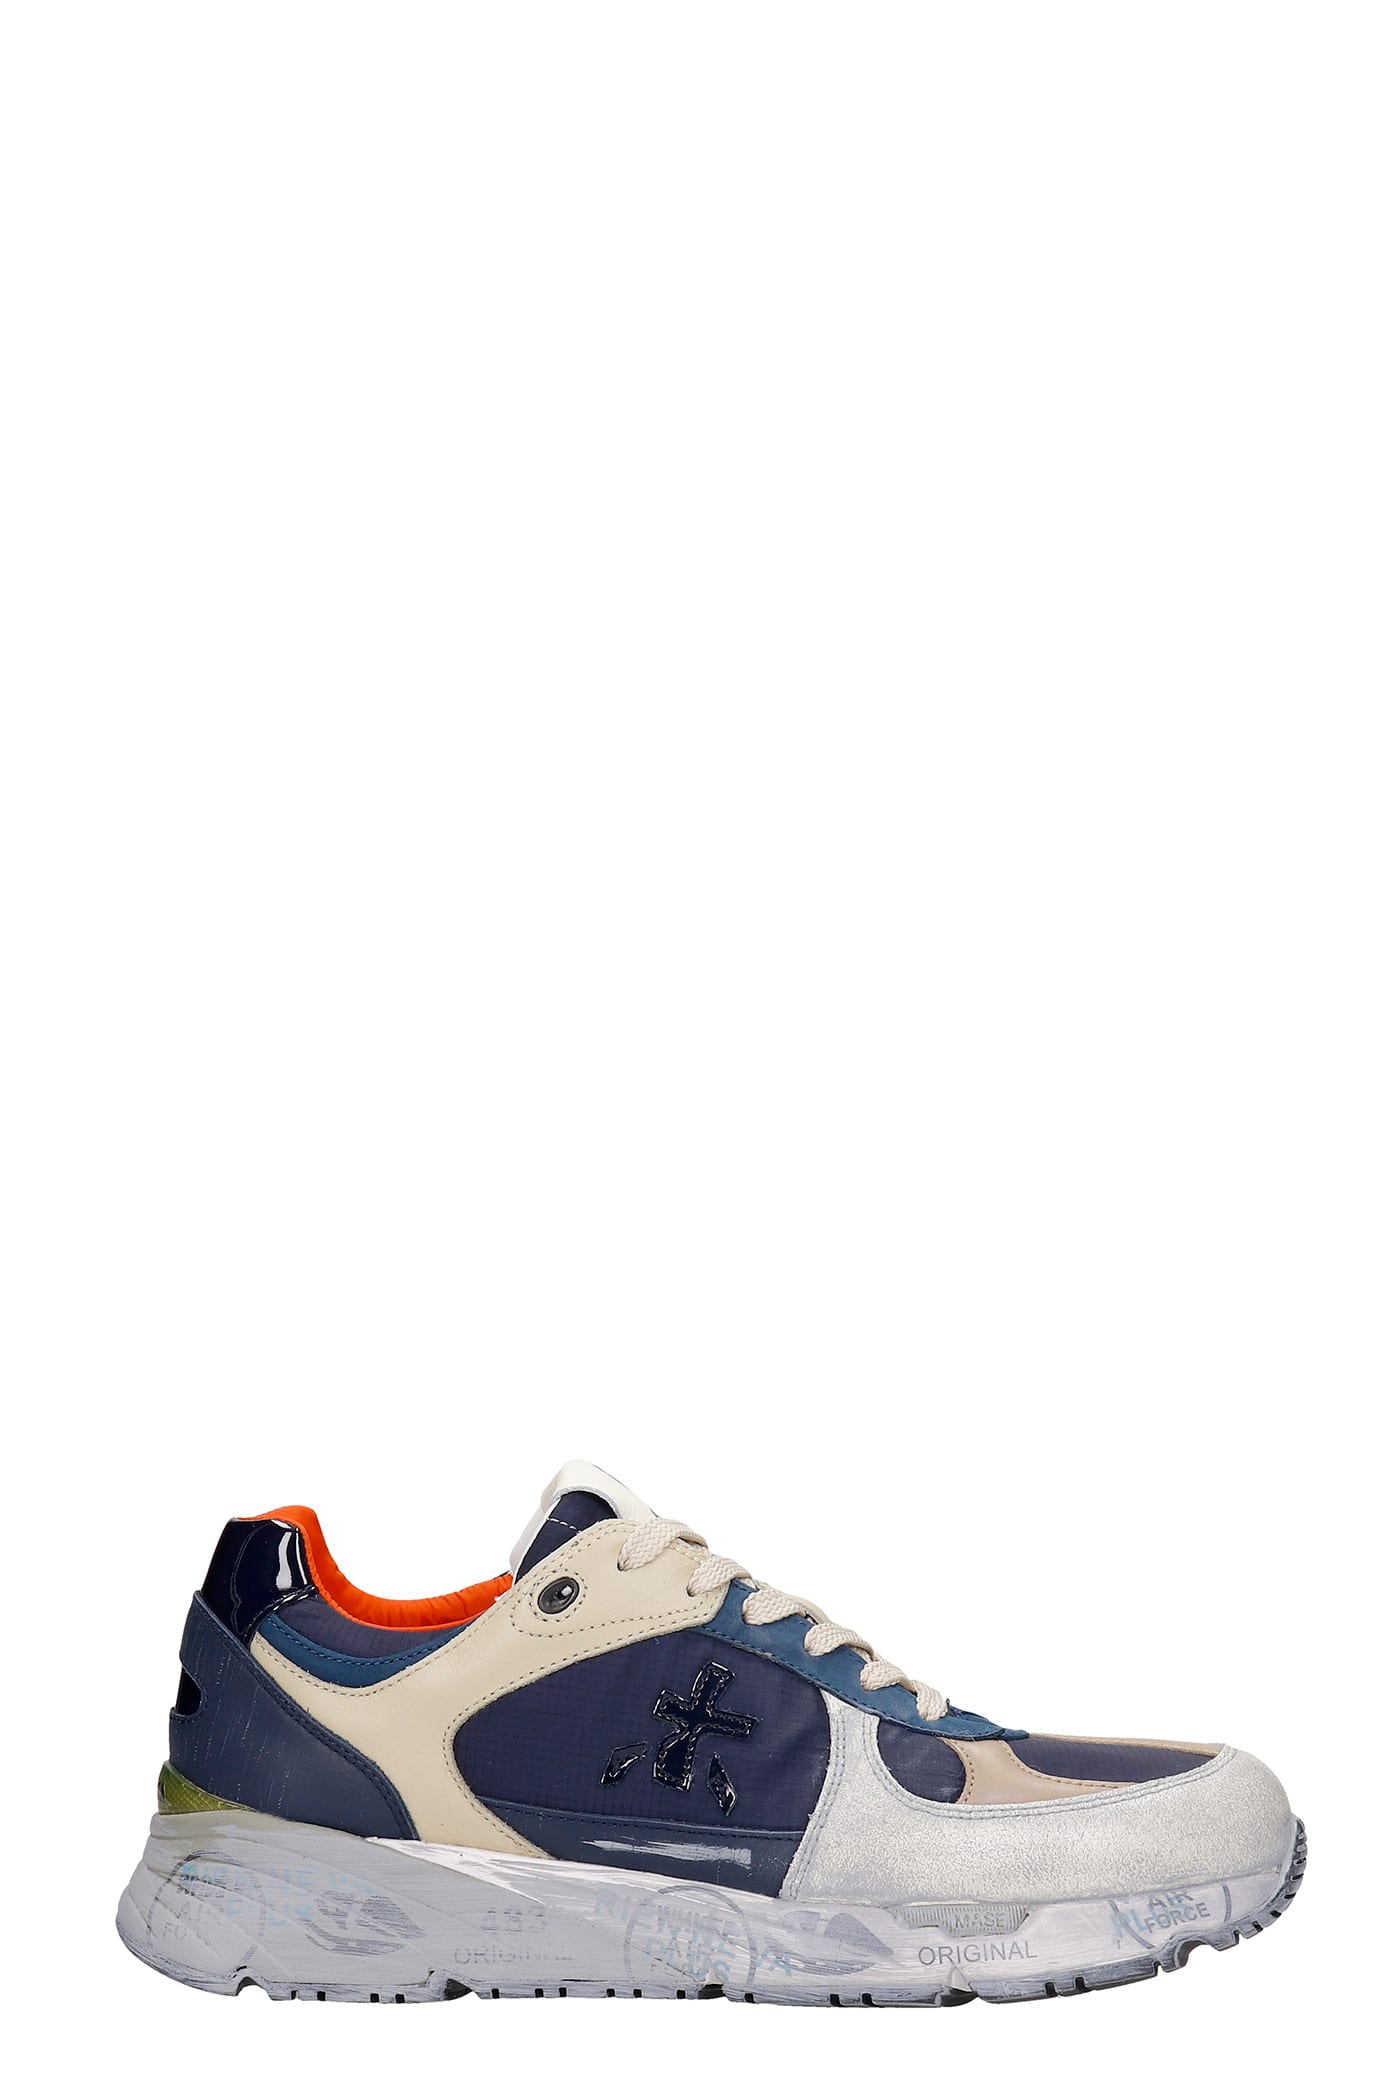 Premiata Mase Sneakers In Blue Leather And Fabric